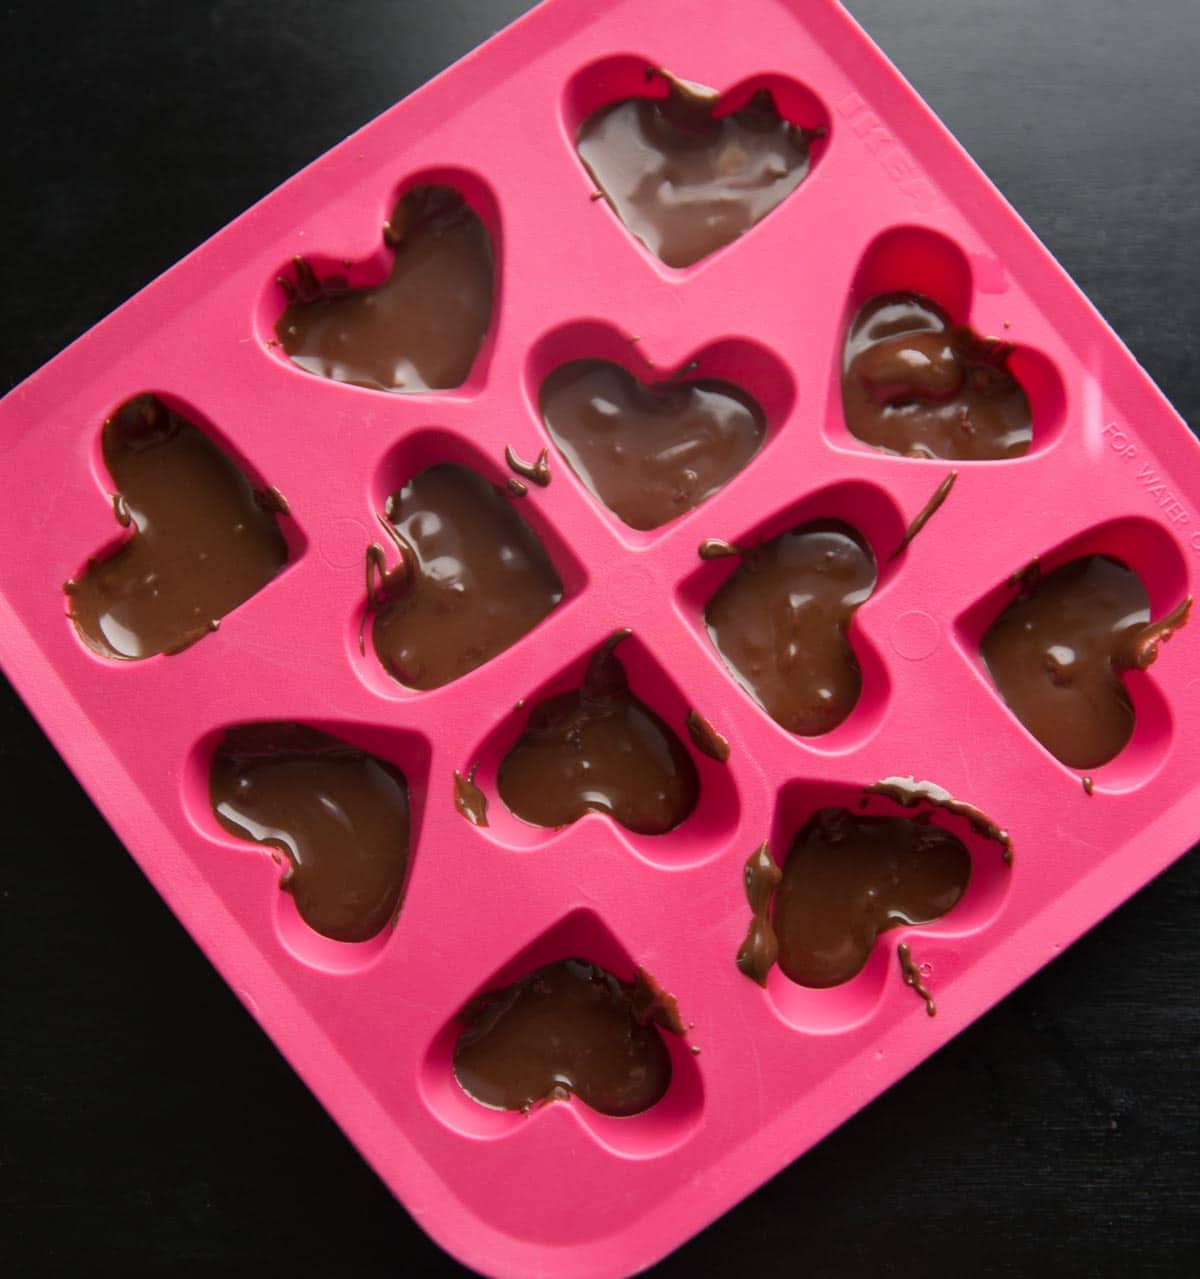 Chocolate Pomegranate Candy Recipe - melted chocolate in candy mold